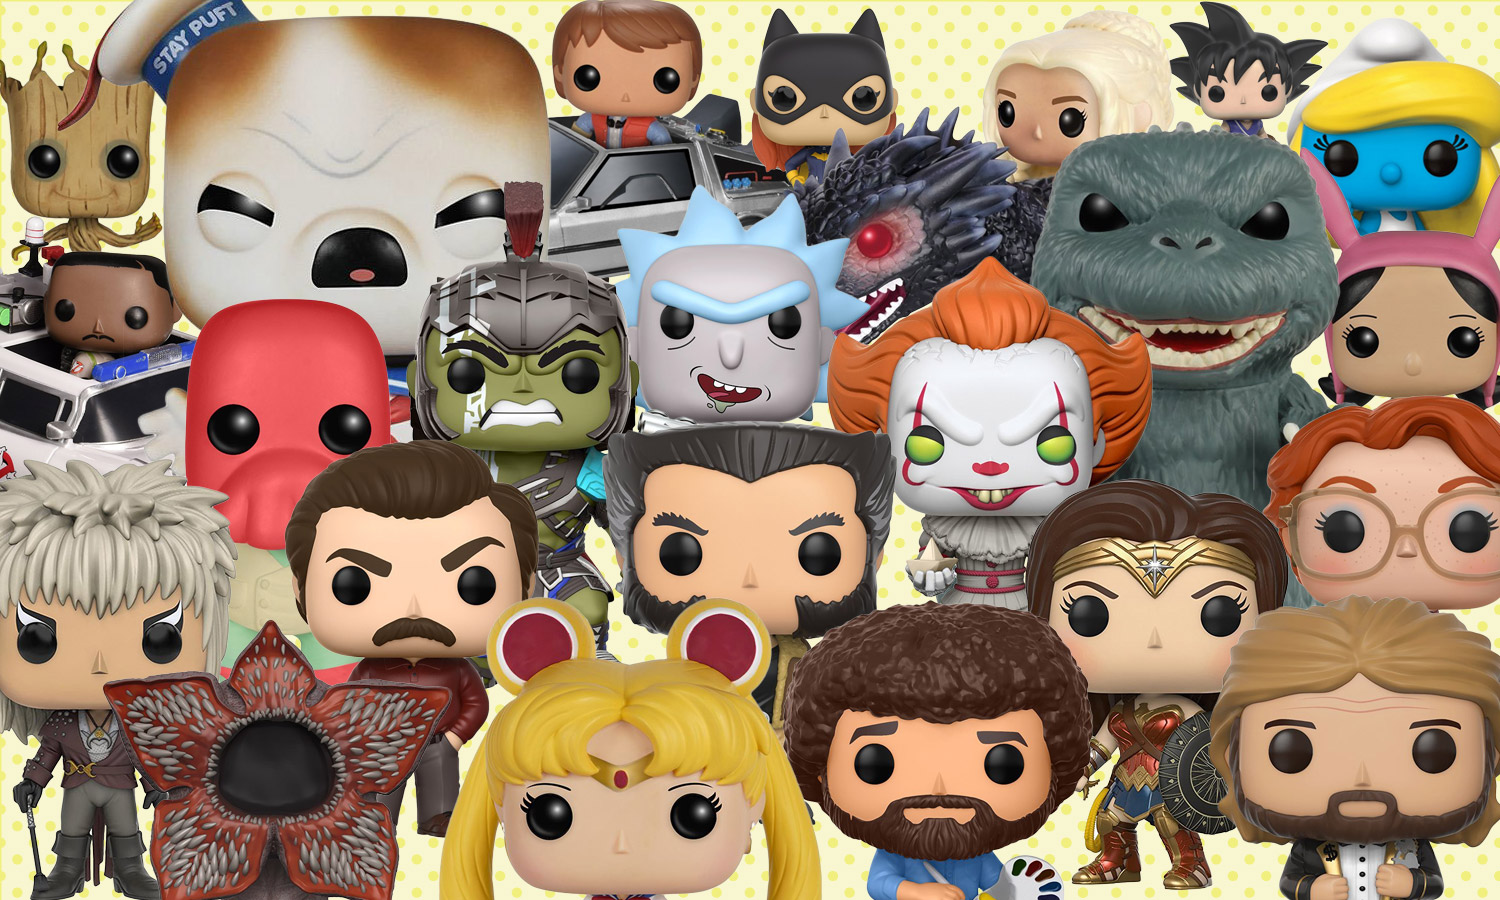 flyde over Charles Keasing Regulering Best Funko Pop Vinyls - 33 Figures to Add to Your Collection | Tom's Guide